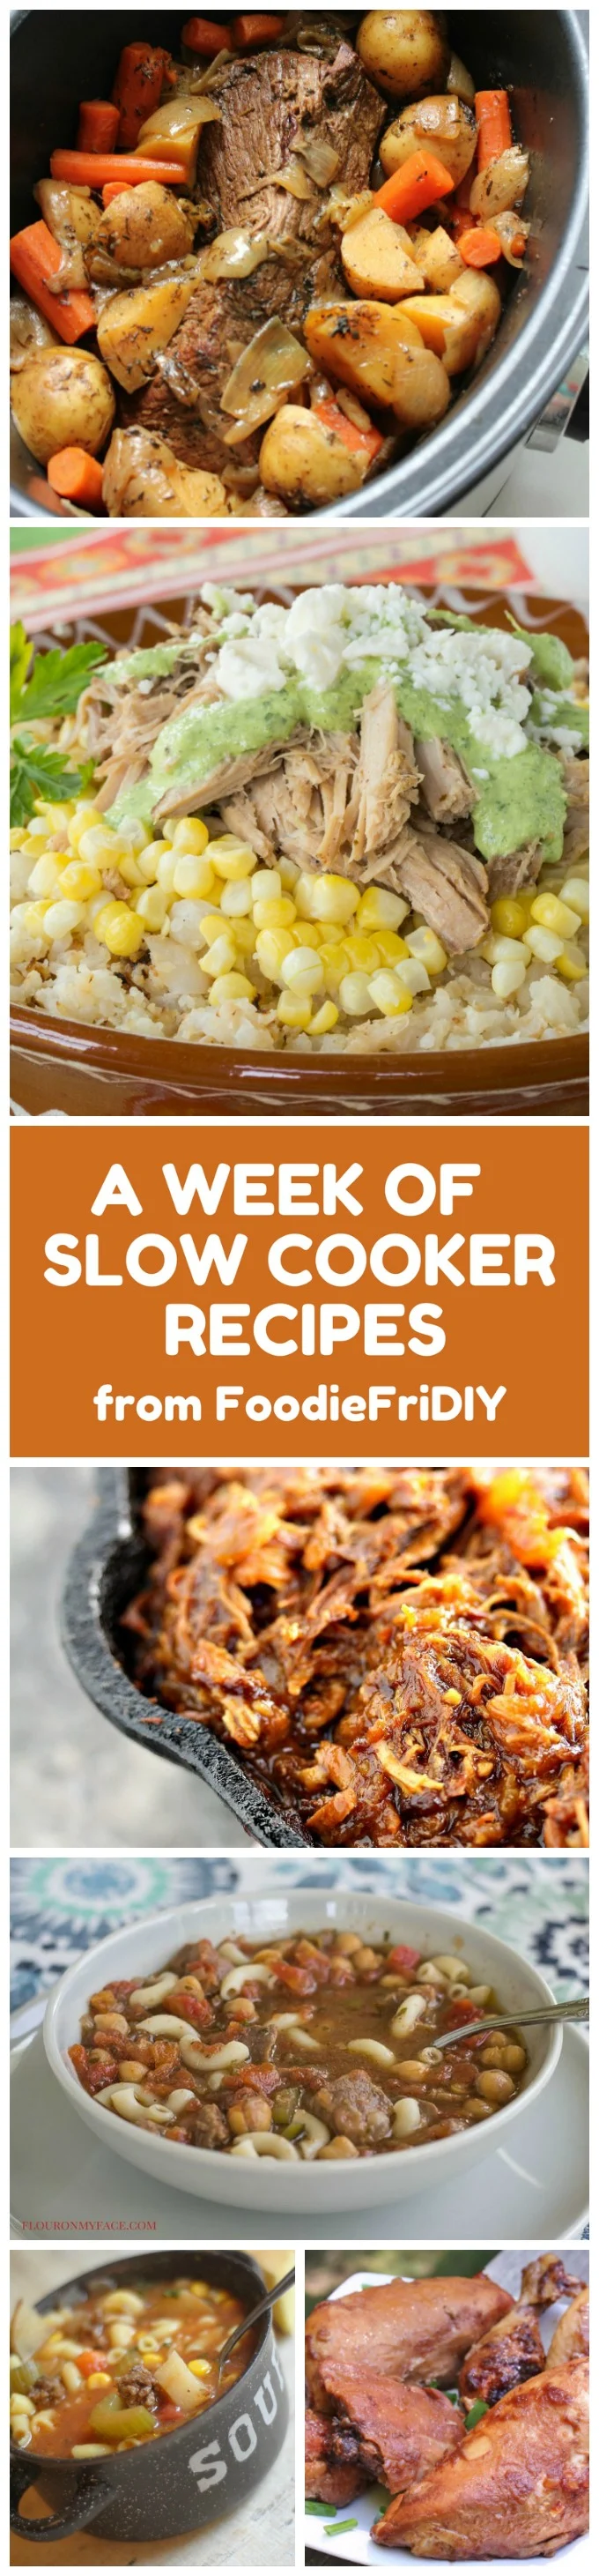 Busy weeknights? Here's a week's worth of slow cooker recipes that everyone in the family will love!